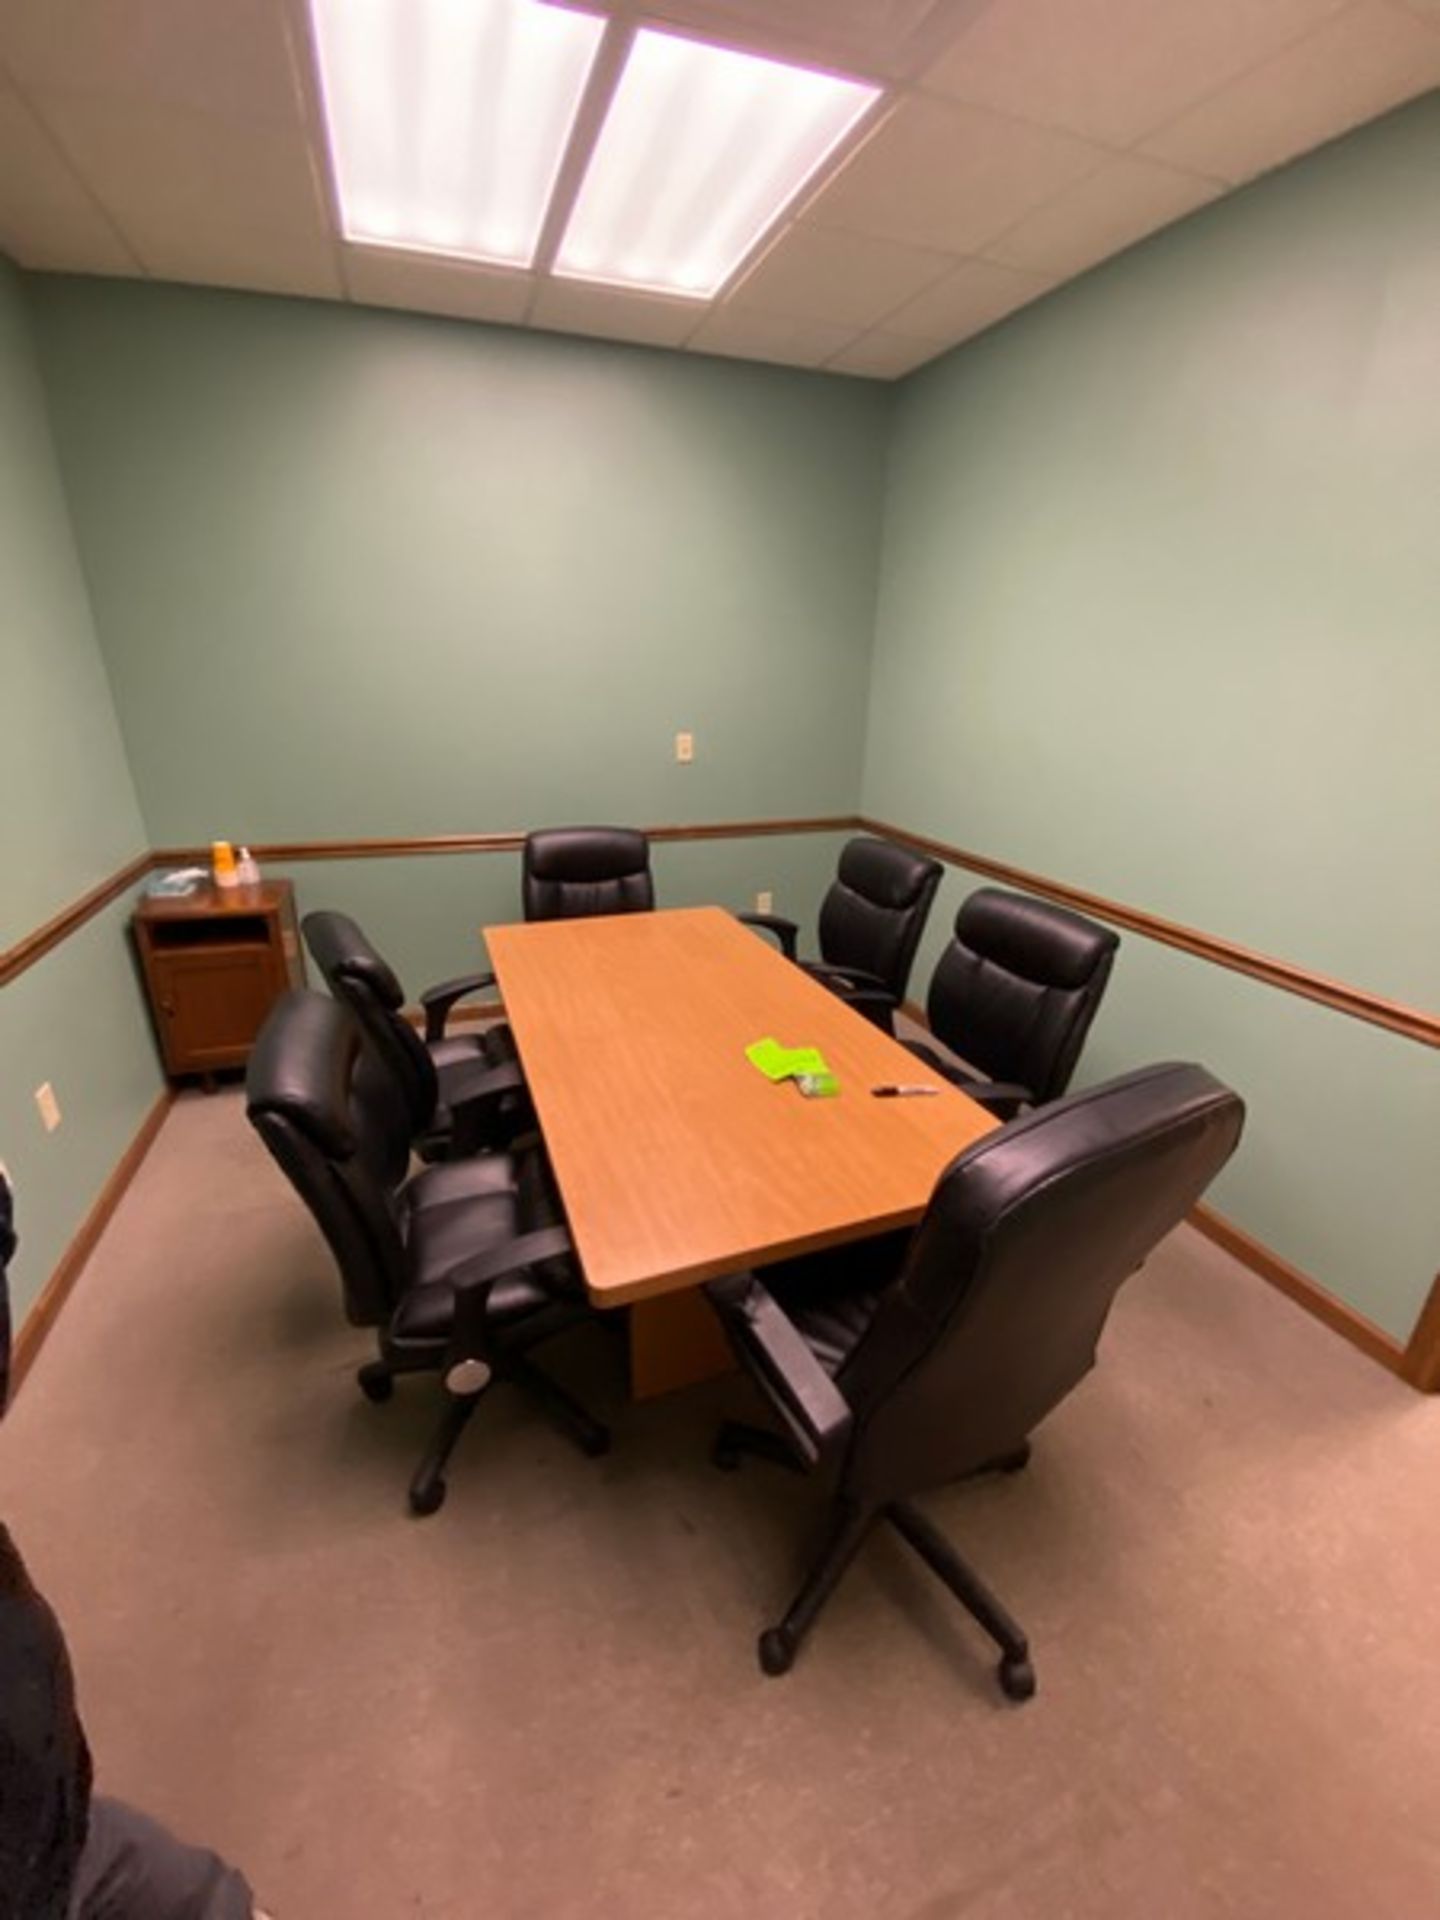 CONTENTS OF CONFERENCE ROOM, INCLUDES CONFERENCE TABLE & CHAIRS (LOCATED IN CALLERY, PA)